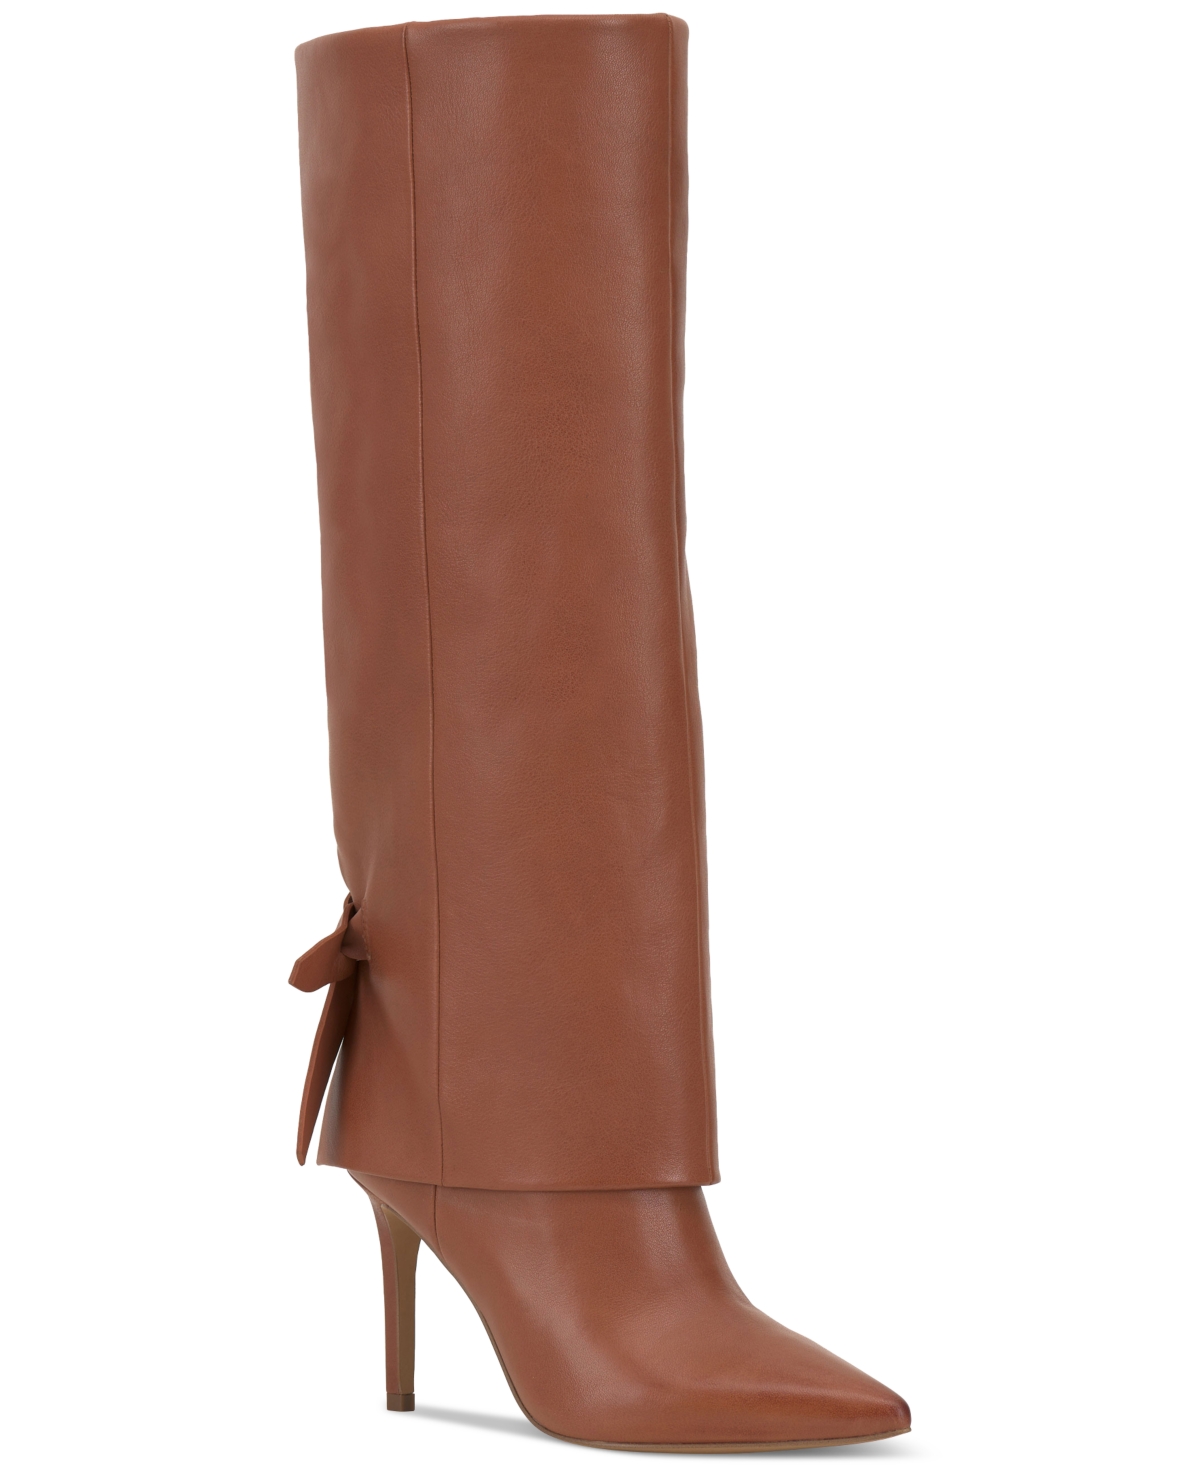 Shop Vince Camuto Women's Kammitie Fold-over Knee-high Stiletto Dress Boots In Maple Leather